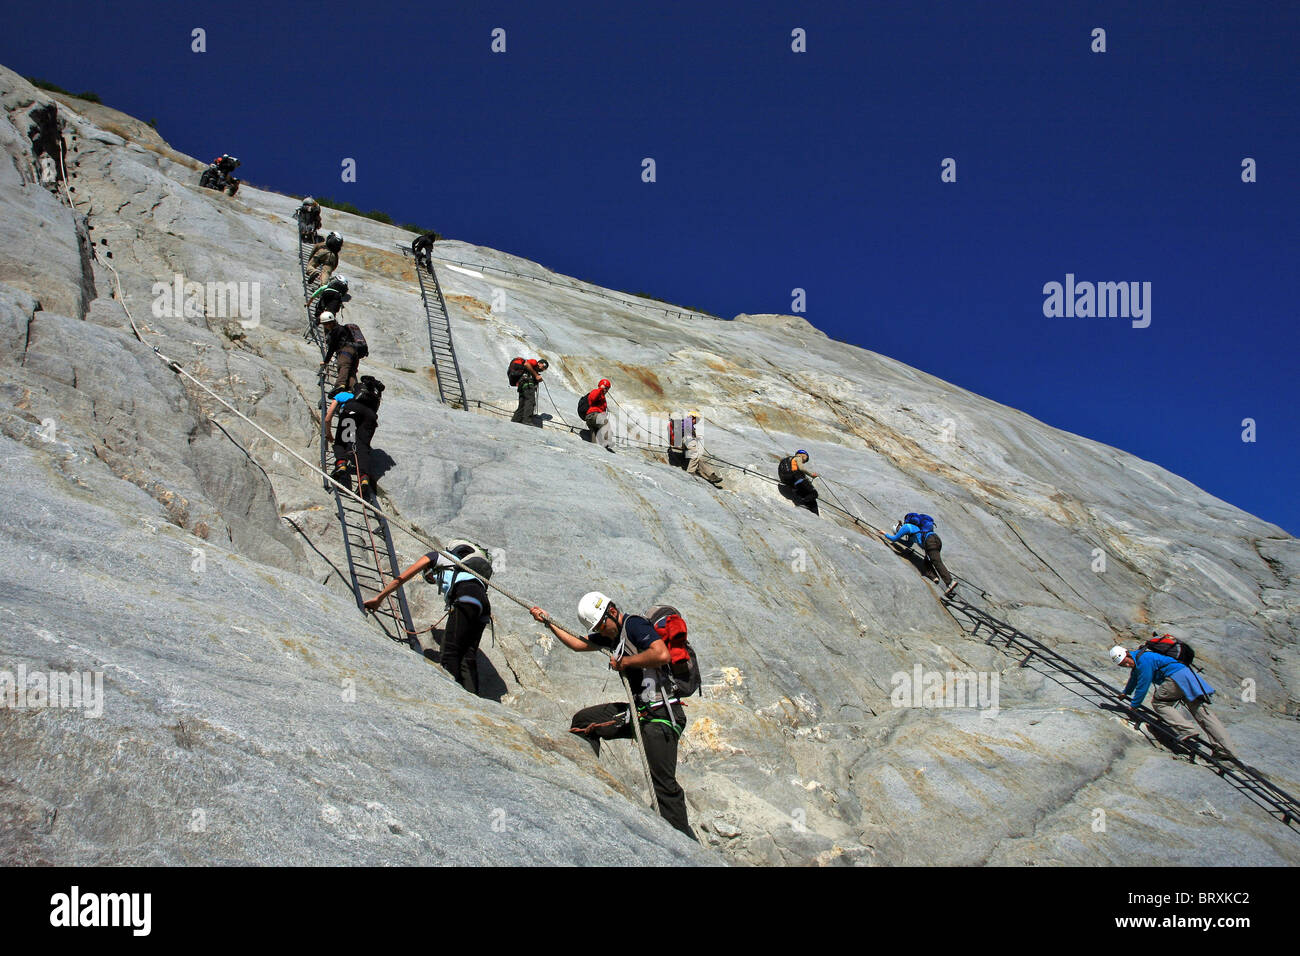 CLEANING OF THE ICE SEA ORGANIZED BY THE FRENCH ALPINE CLUB, CHAMONIX, HAUTE-SAVOIE (74), FRANCE Stock Photo